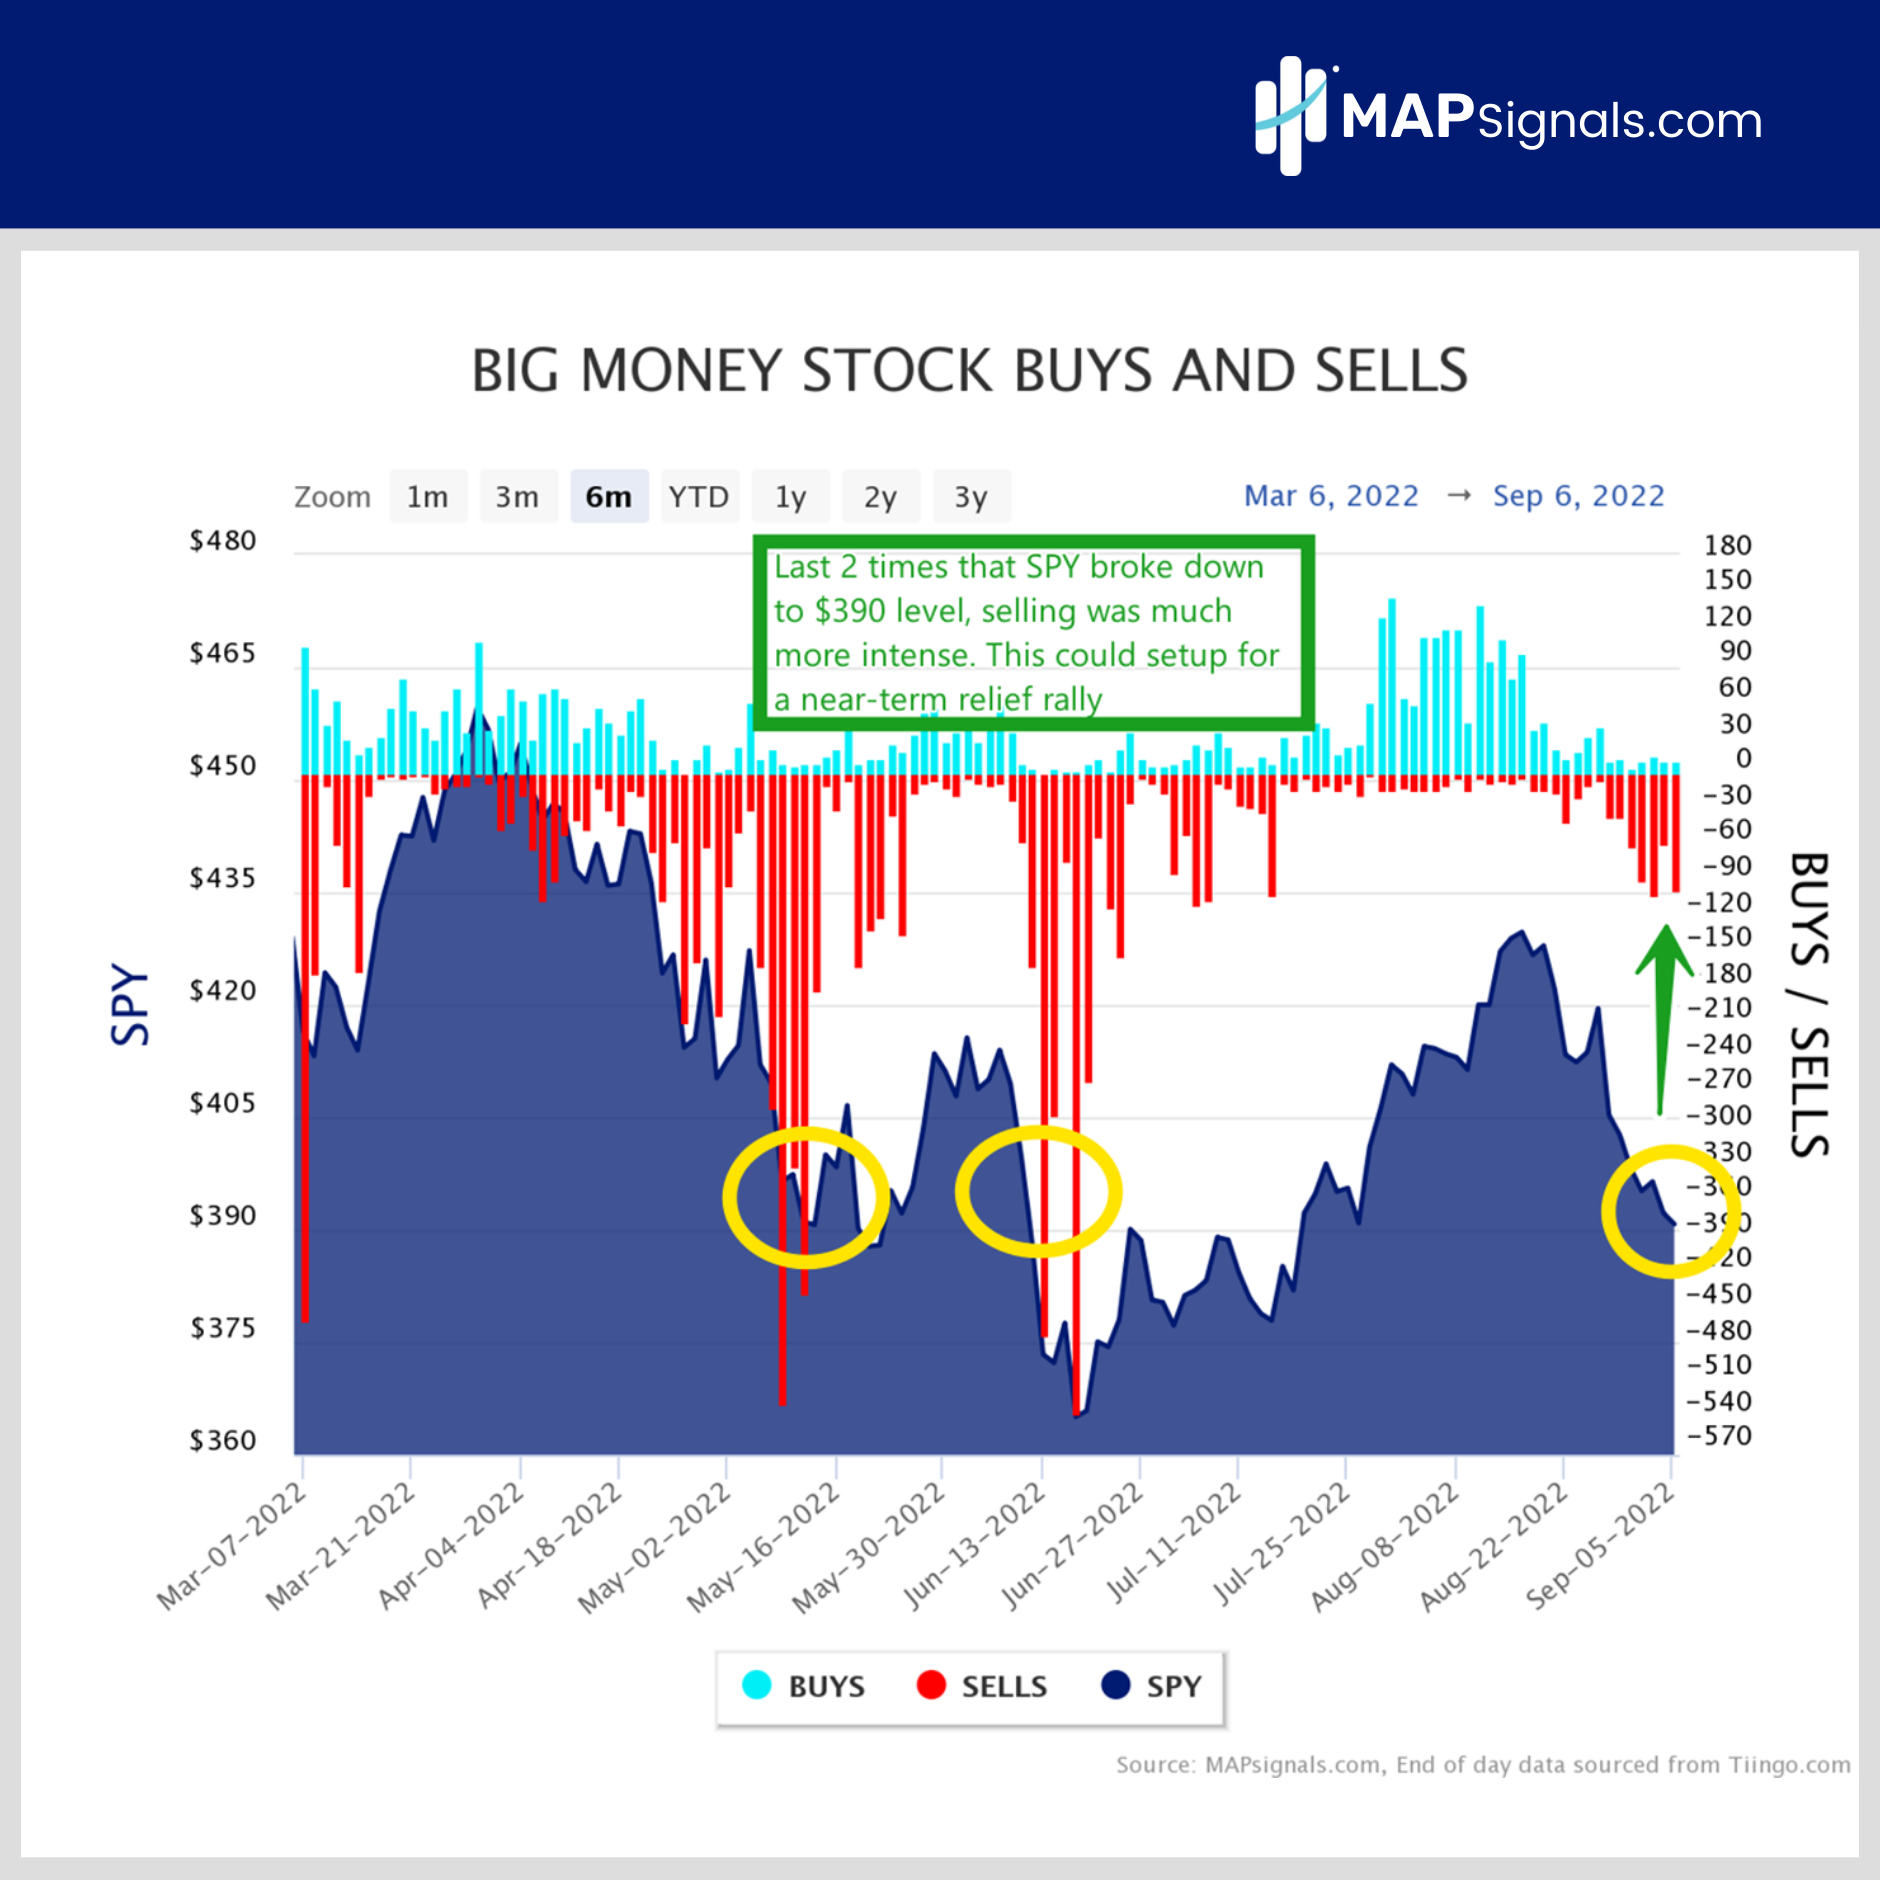 near-term relief rally | Big Money stock buys and sells